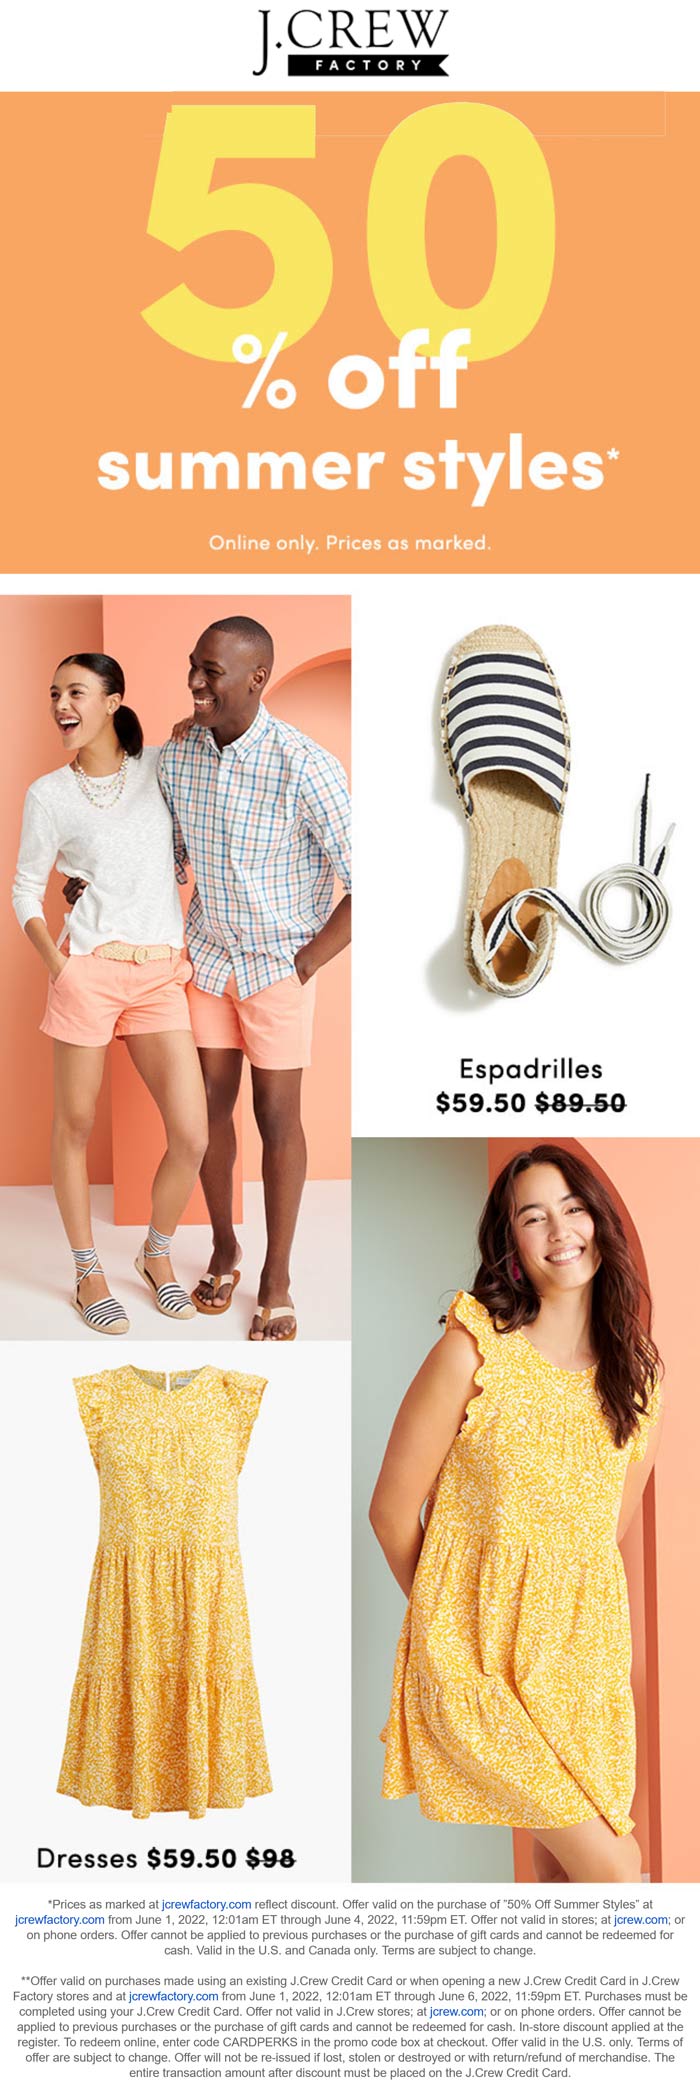 J.Crew Factory stores Coupon  50% off summer styles online at J.Crew Factory #jcrewfactory 